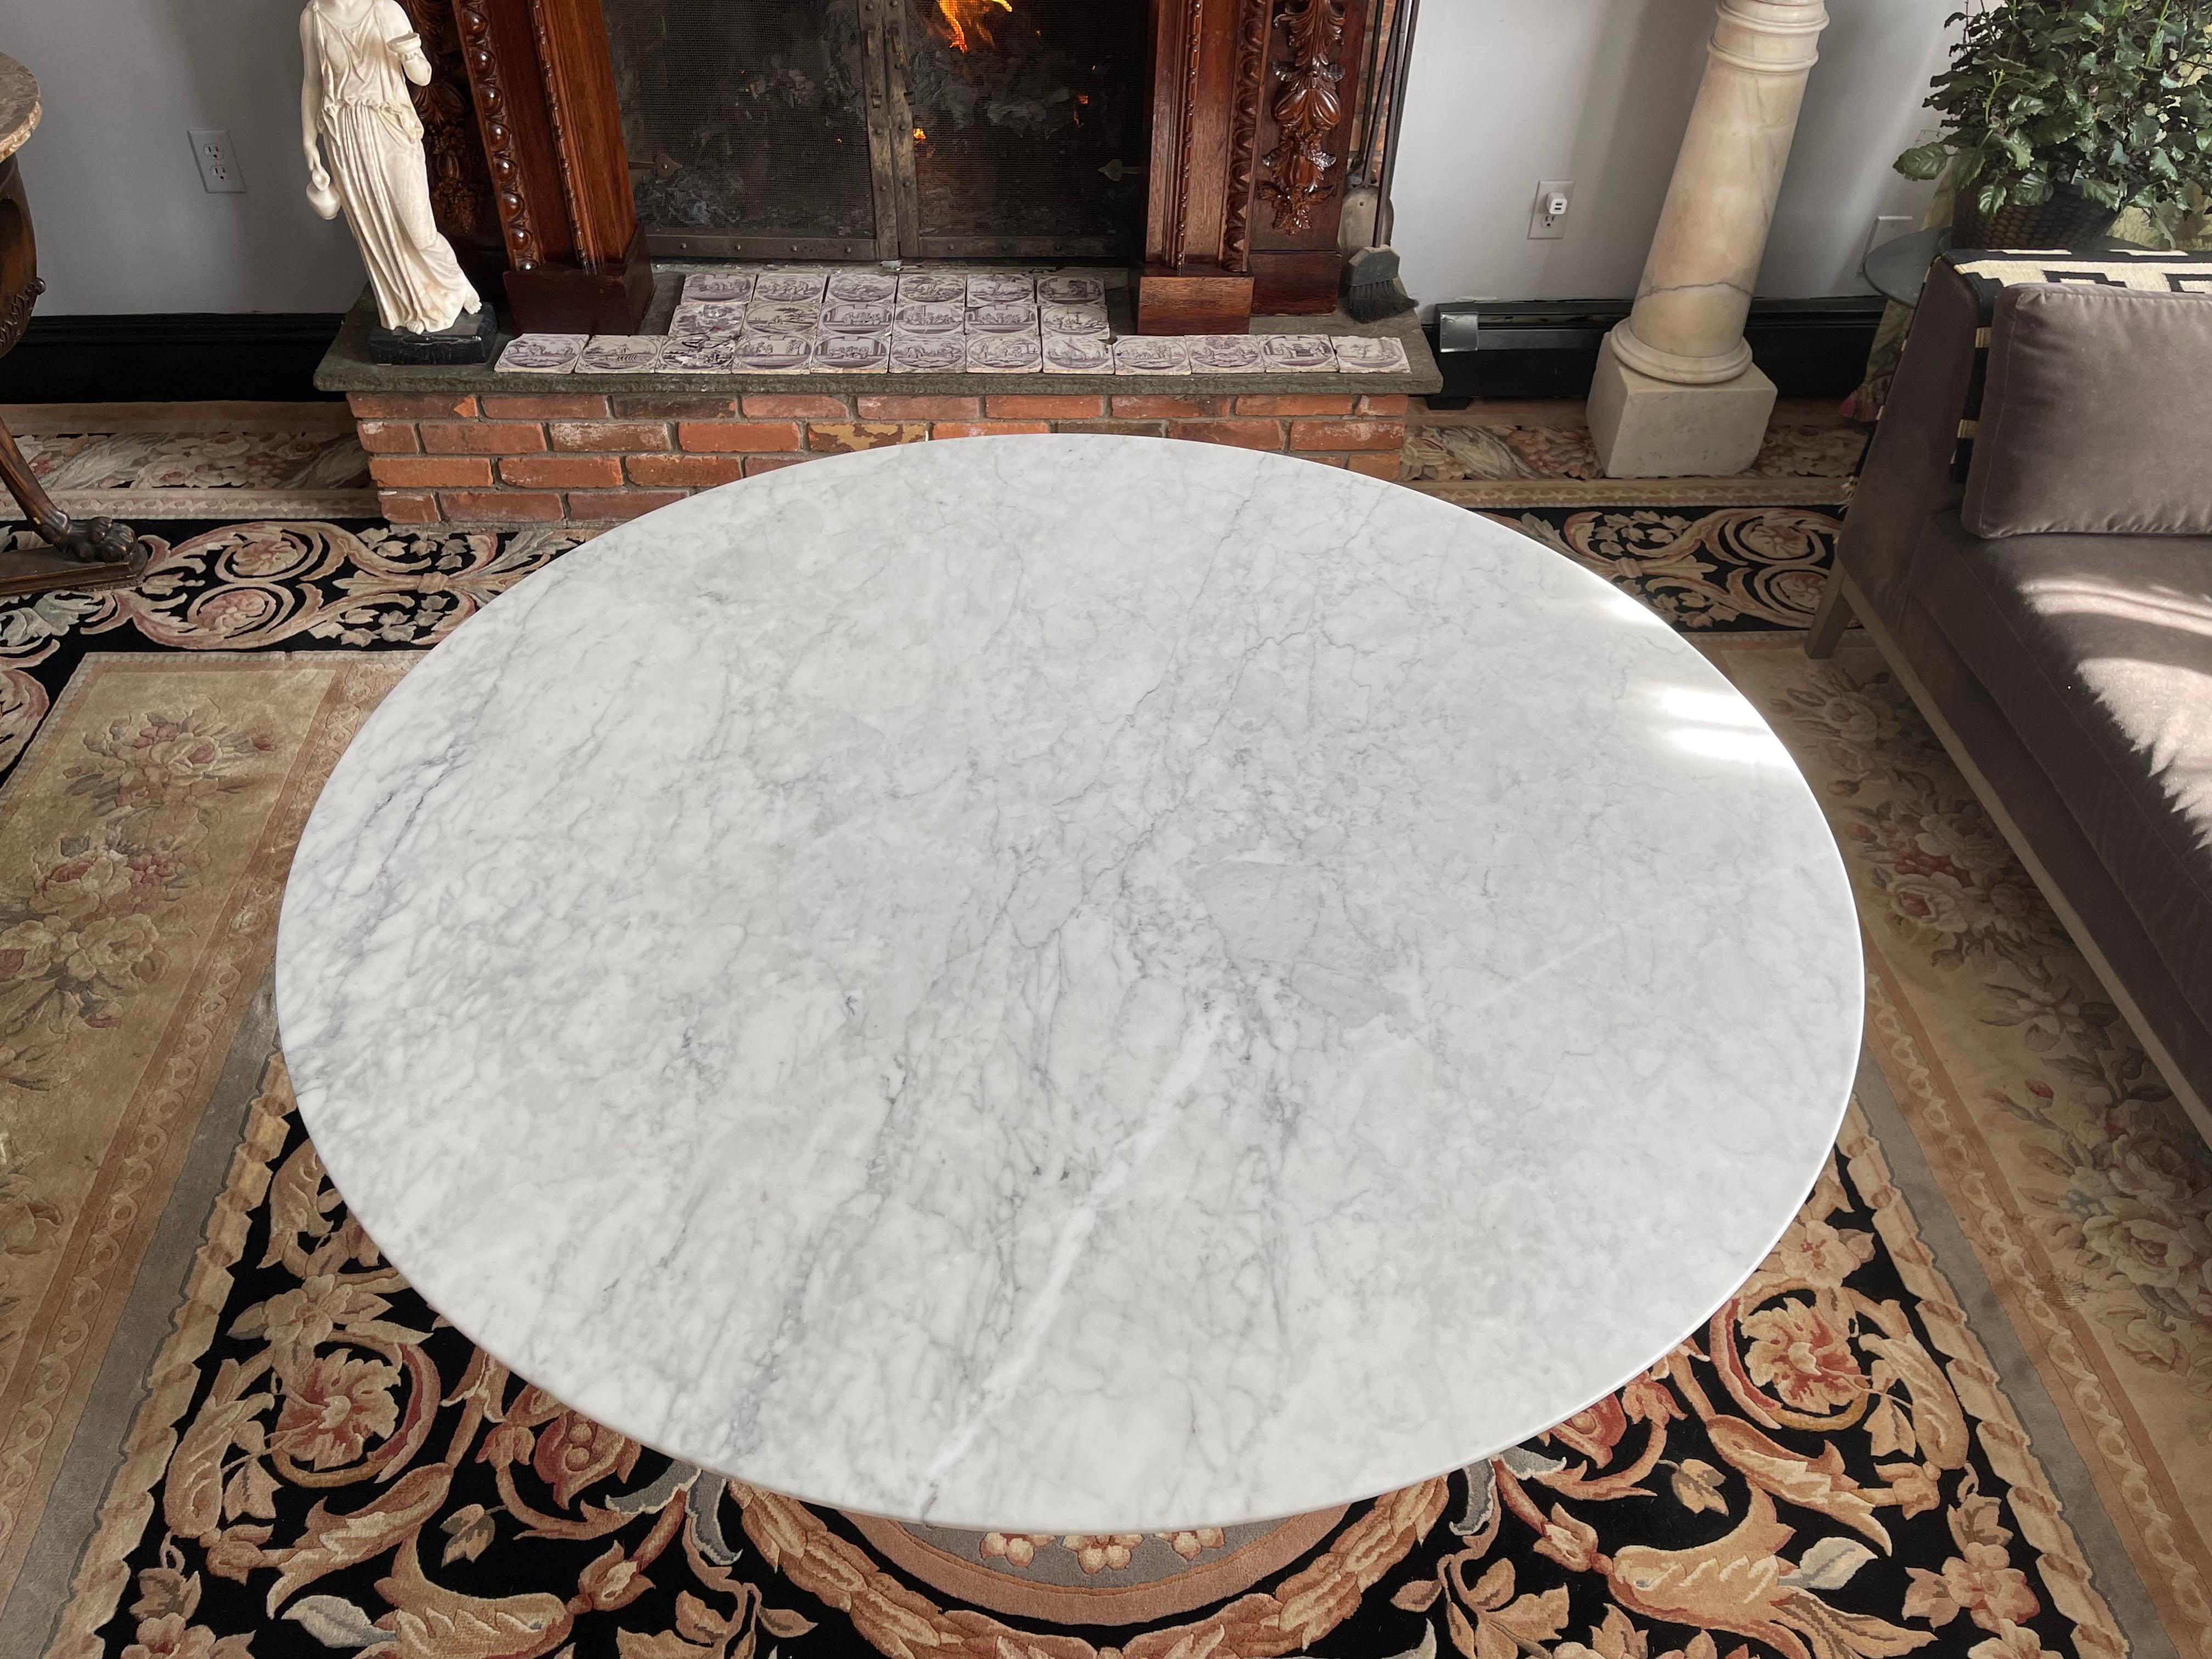 Hand-Carved Round Carrara Marble Dining Table after Eero Saarinen’s “Tulip Table” for Knoll  For Sale